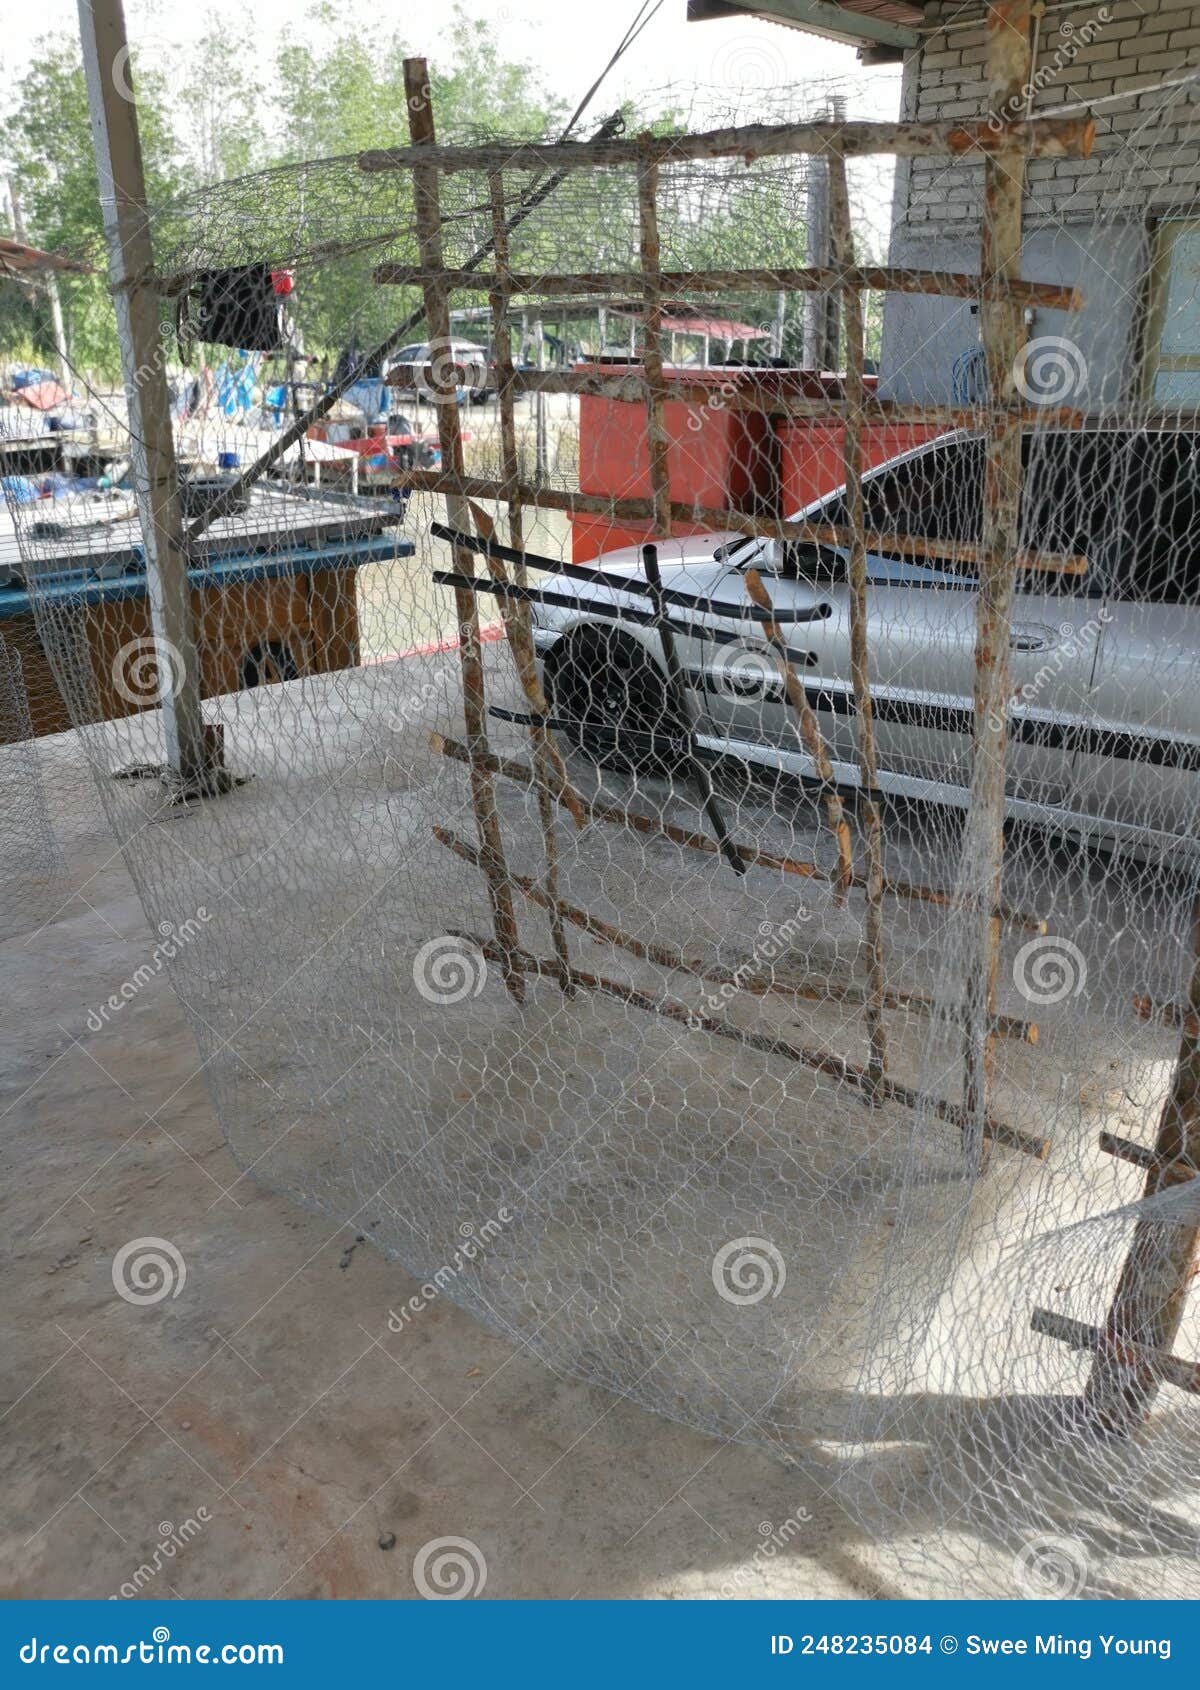 Outdoor Scene of the DIY Fish Trap Structure Make from Mangrove Wood,wire  and Polystyrene Pipe. Stock Photo - Image of marine, material: 248235084